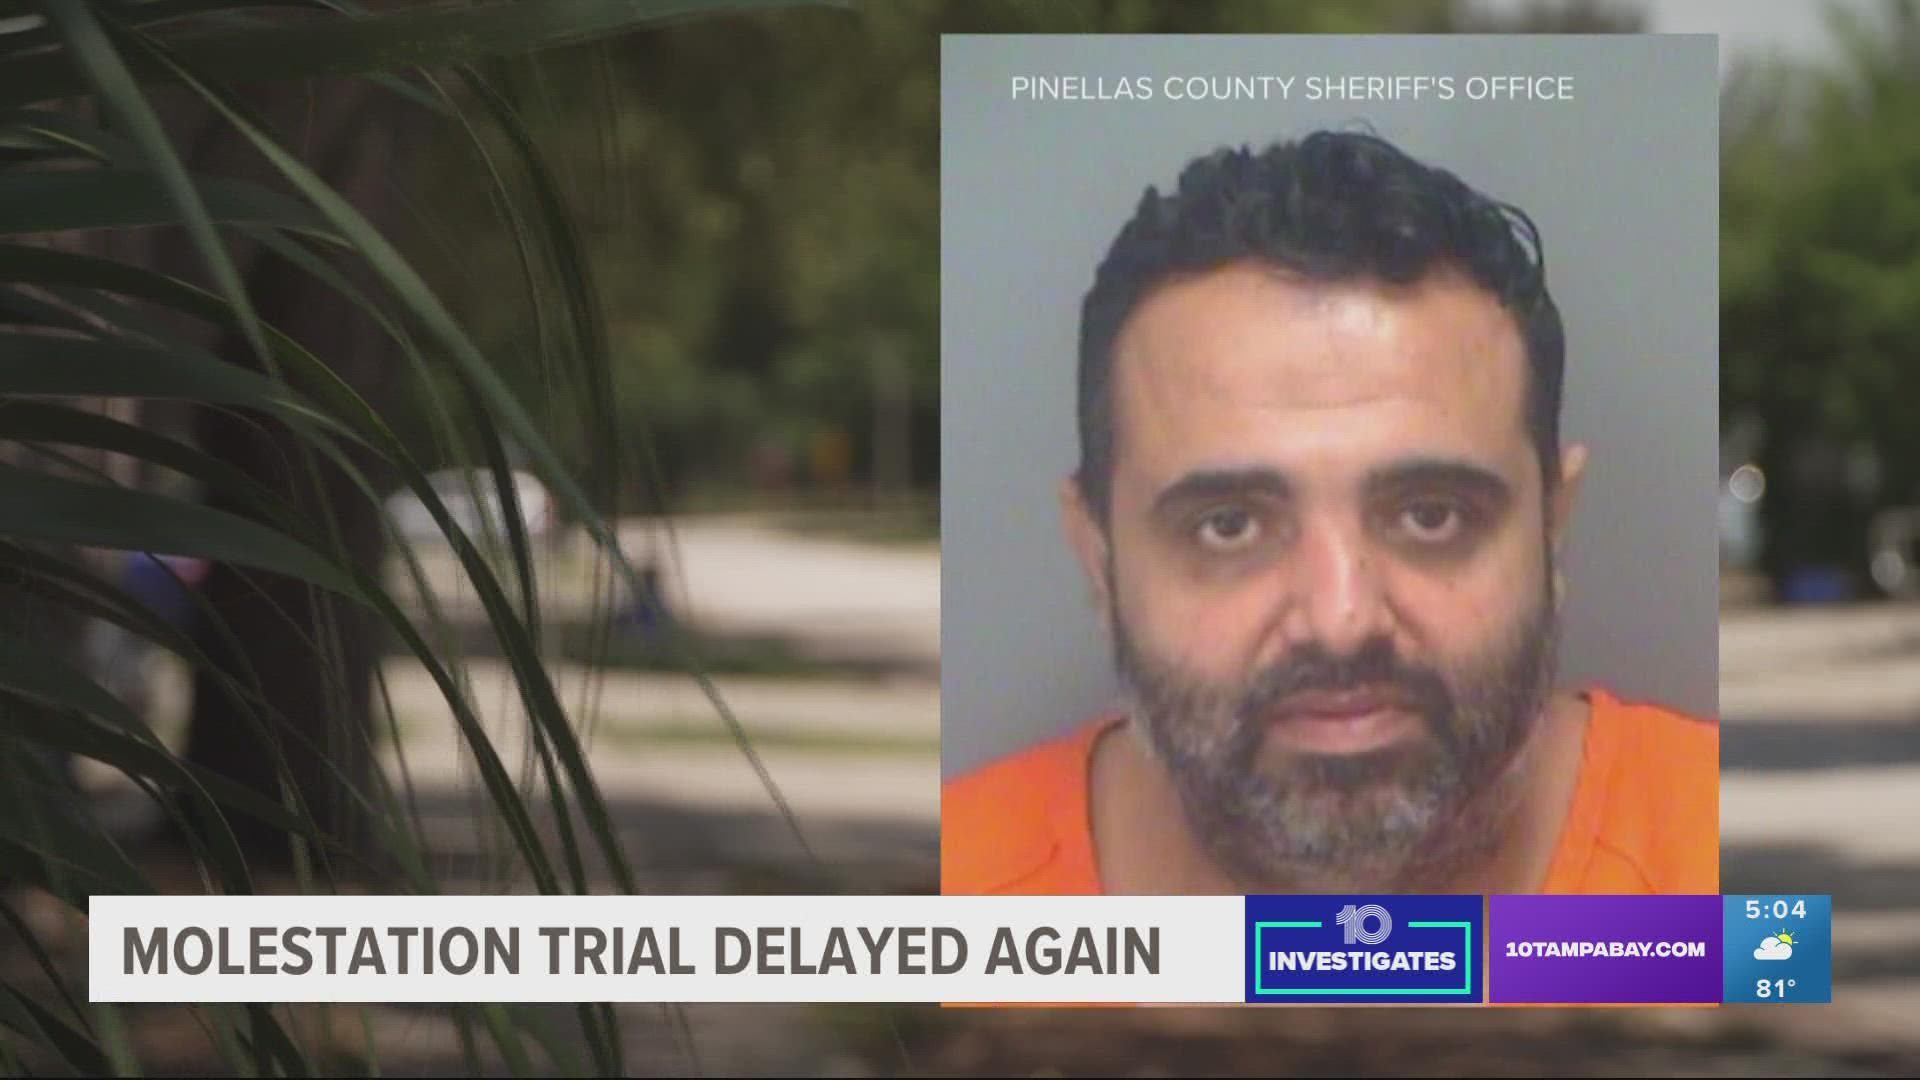 Ehab Ghoneim was arrested last year, accused of drugging and molesting boys. He was a youth program volunteer at the Islamic Society of the Tampa Bay area.